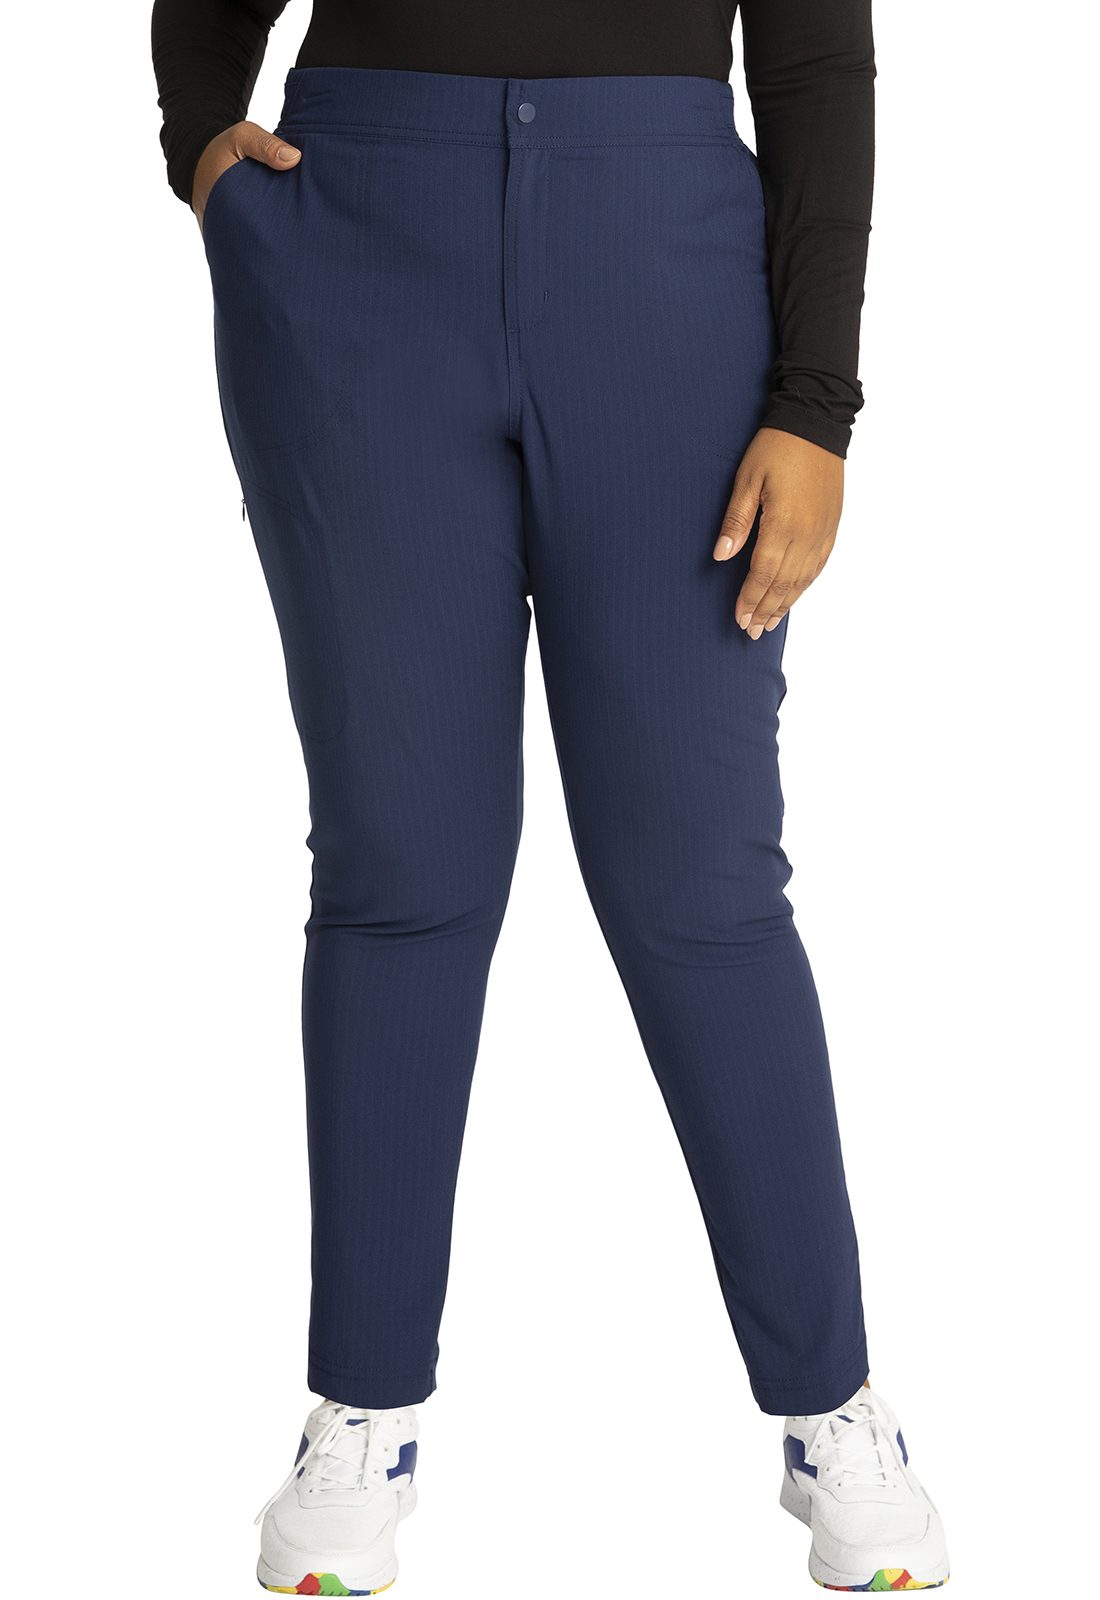 Women's Zip Fly Front Tapered Leg Pant